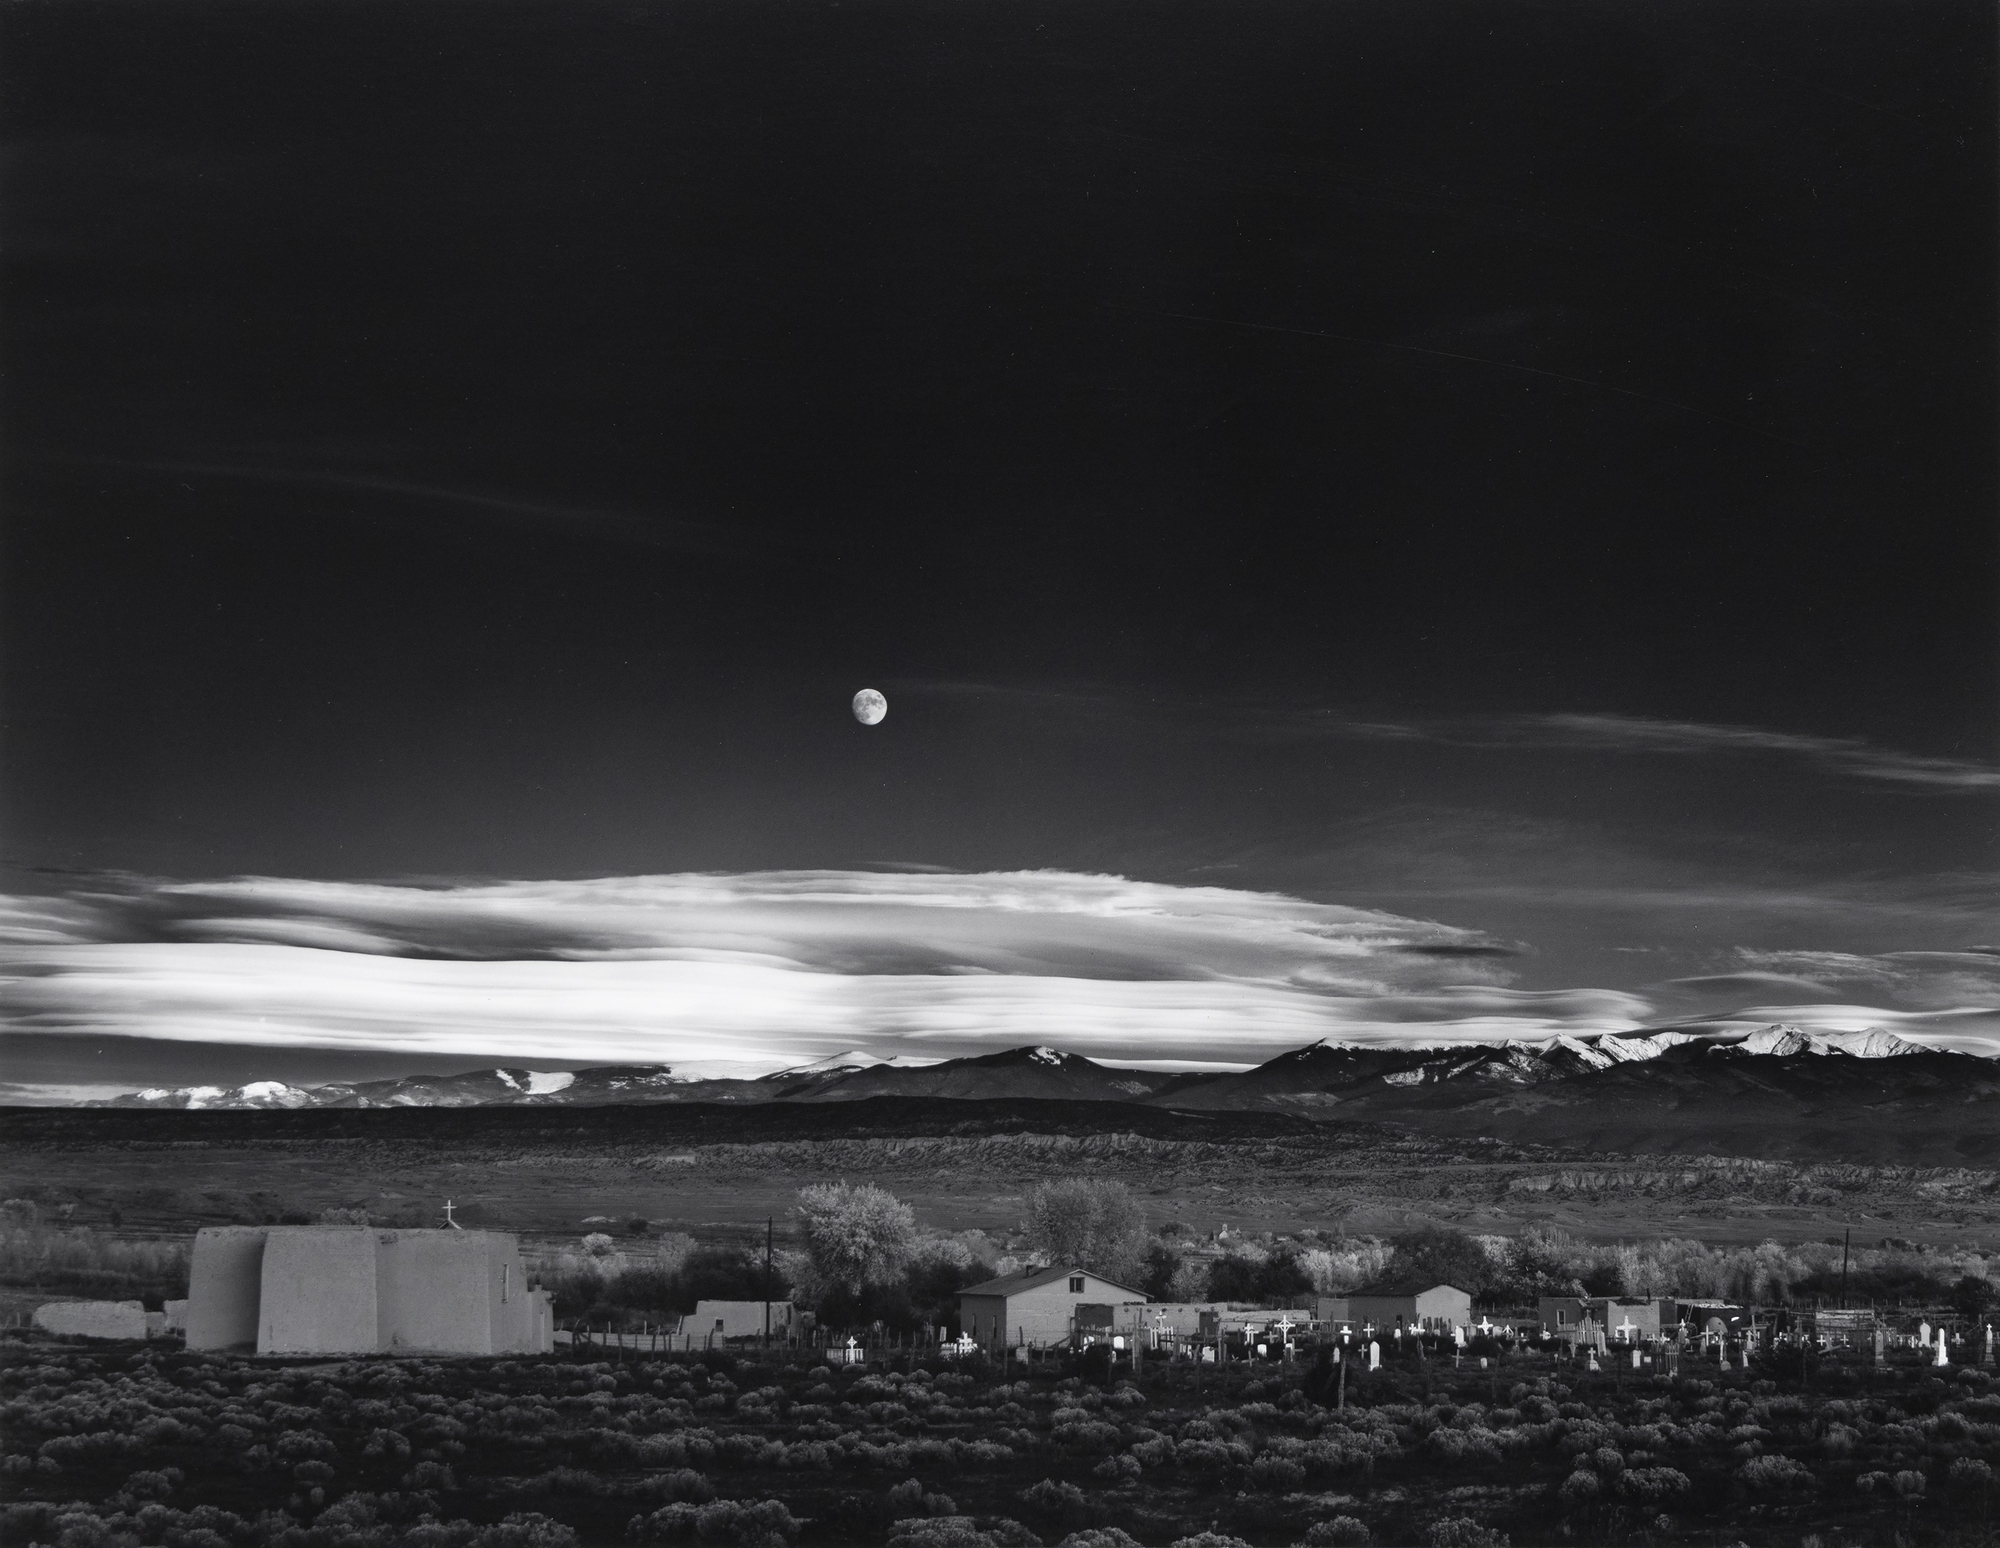 Known for his rigorous engagement in the darkroom, Ansel Adams created 1,300 prints of Moonrise, Hernandez over 40 years of dodging and burning, creating a longitudinal group of masterworks. Moonrise is a formidable composition that holds us in suspended appreciation for its hauntingly beautiful impression. We do not need to know of Ansel's desperate scramble to set his tripod, find his meter to grasp that transience, or ponder the kismet of capturing that moment. In this 1959 print, all the glorious details are present: the almost, but not quite, full moon with its discernable features and the essential graveyard with its glowing markers and starkly illuminated white crosses caught in the waning moment of daylight's inevitable retreat.